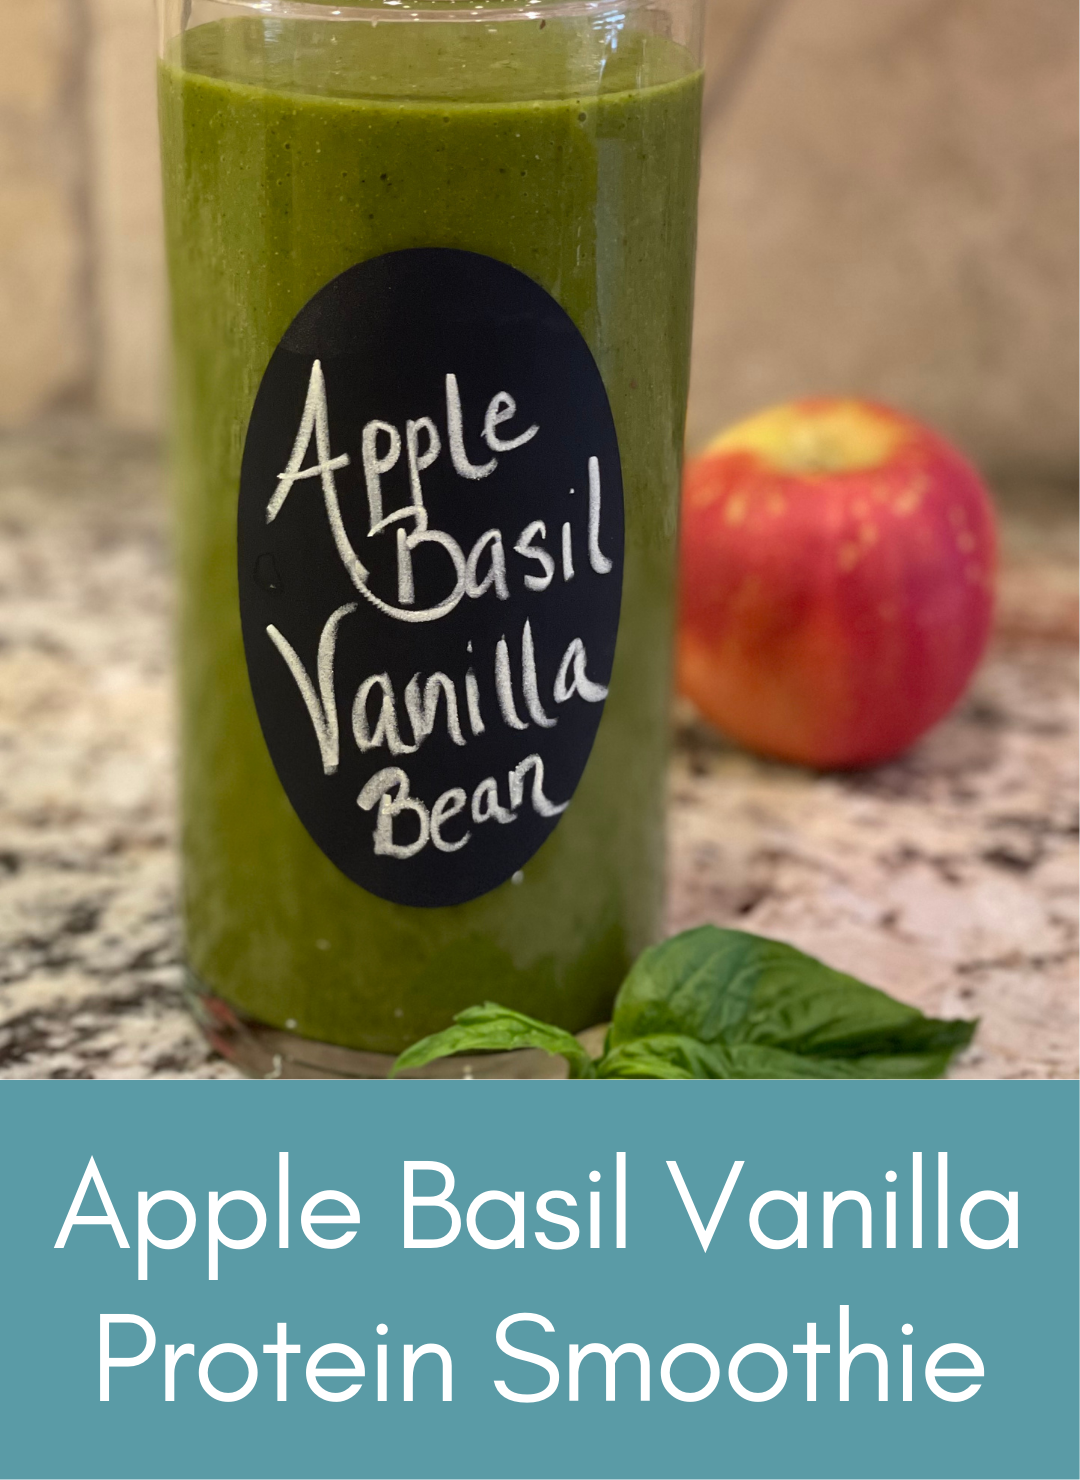 Apple basil vanilla protein superfood power smoothie Picture with link to recipe